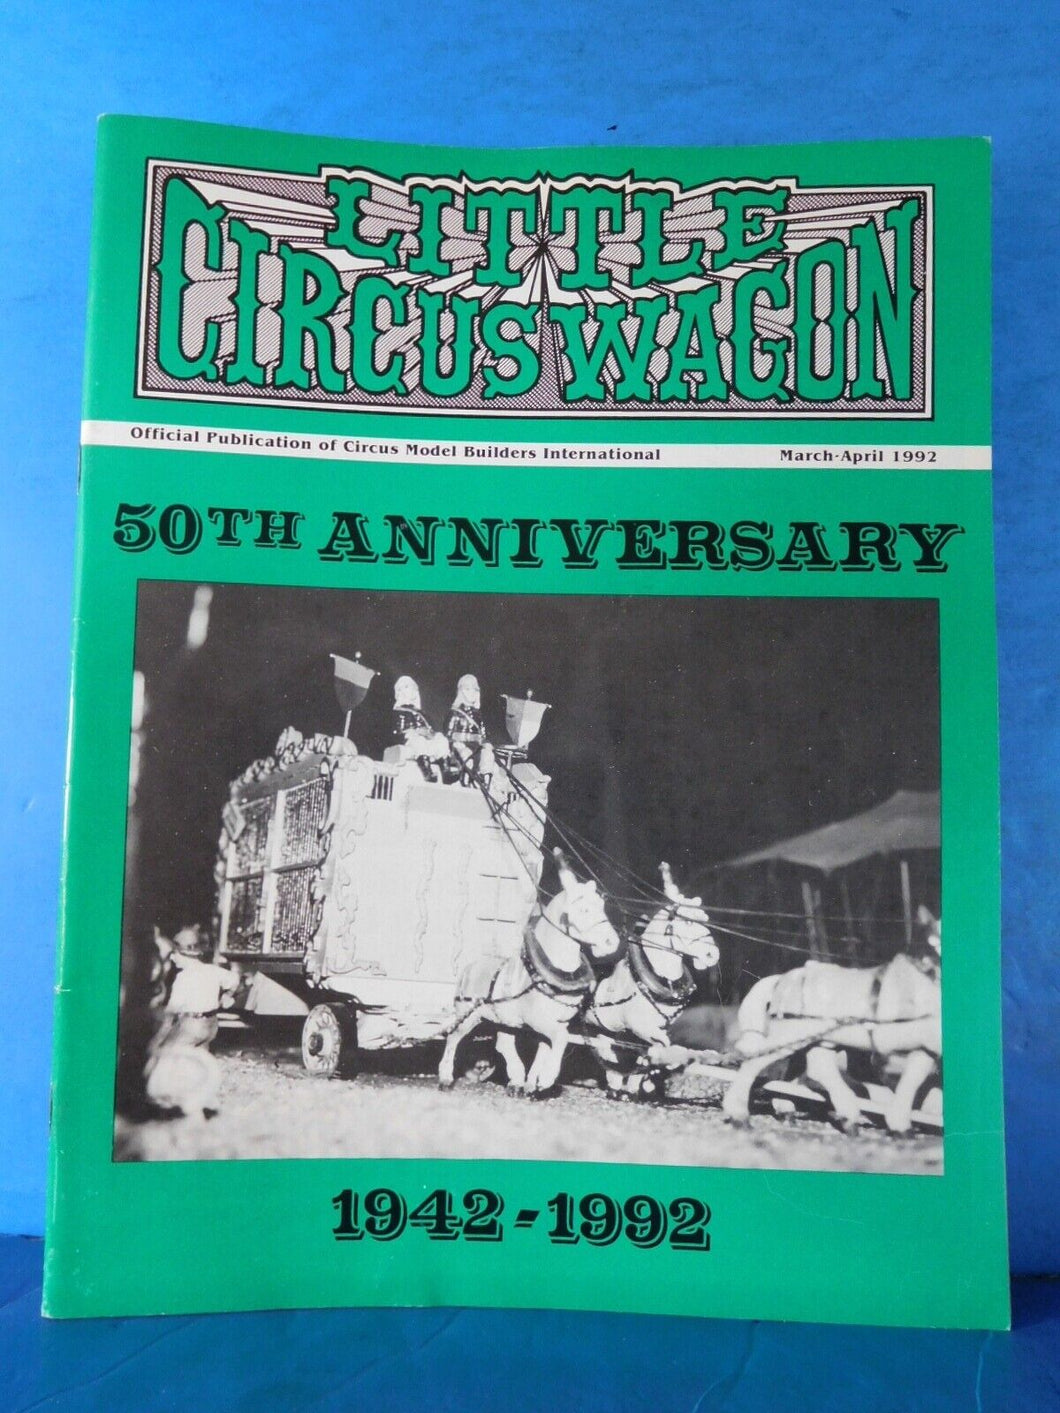 Little Circus Wagon 1992 March April Circus Model Builders International